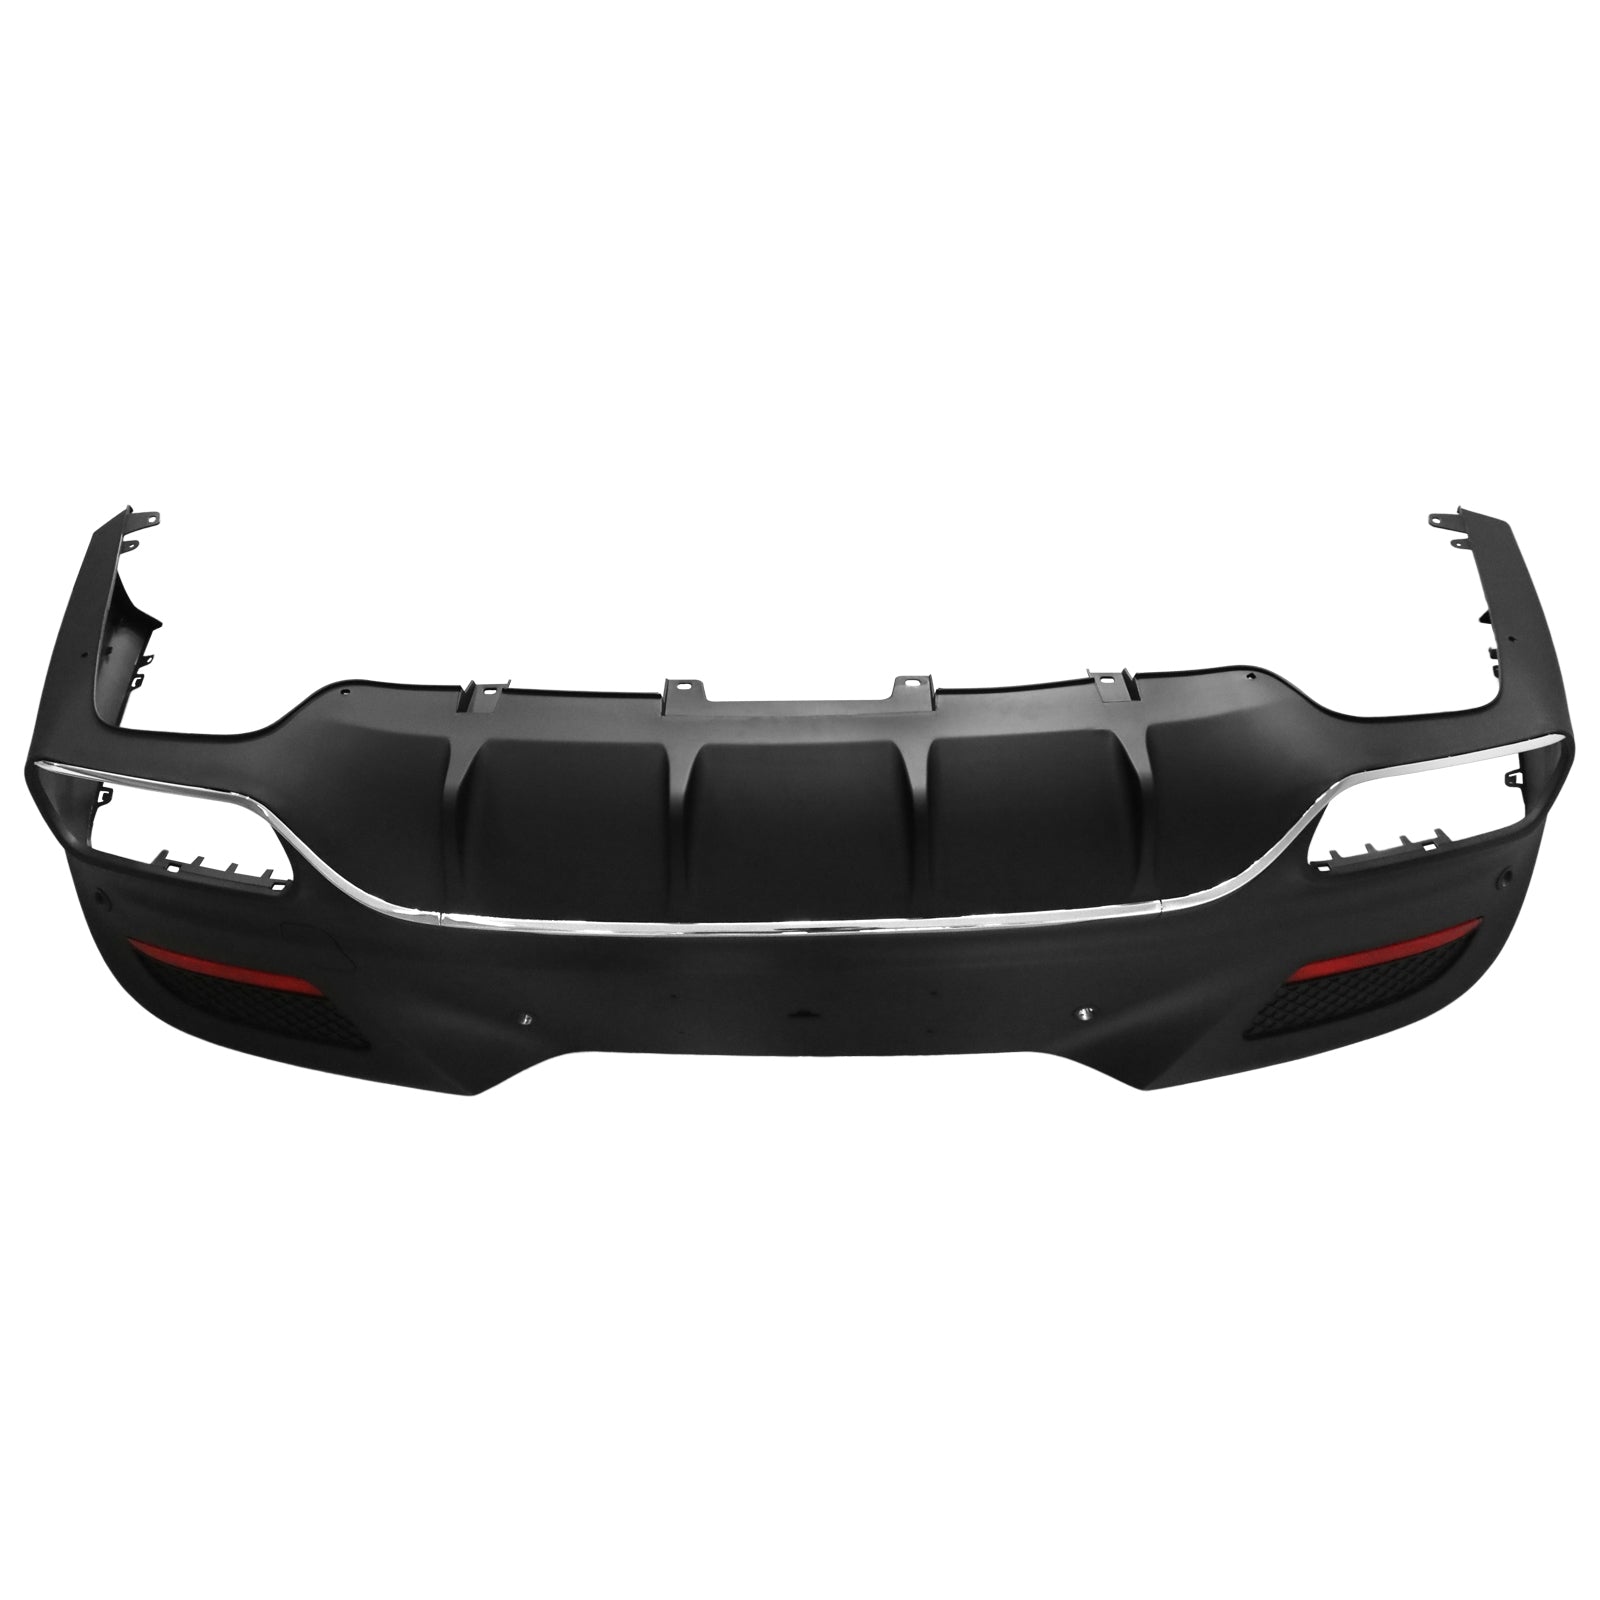 Mercedes Benz 2015-2016 W166 GLE-Class GLE63 coupe facelift to TI Styles Front Rear Bumper Body Kit